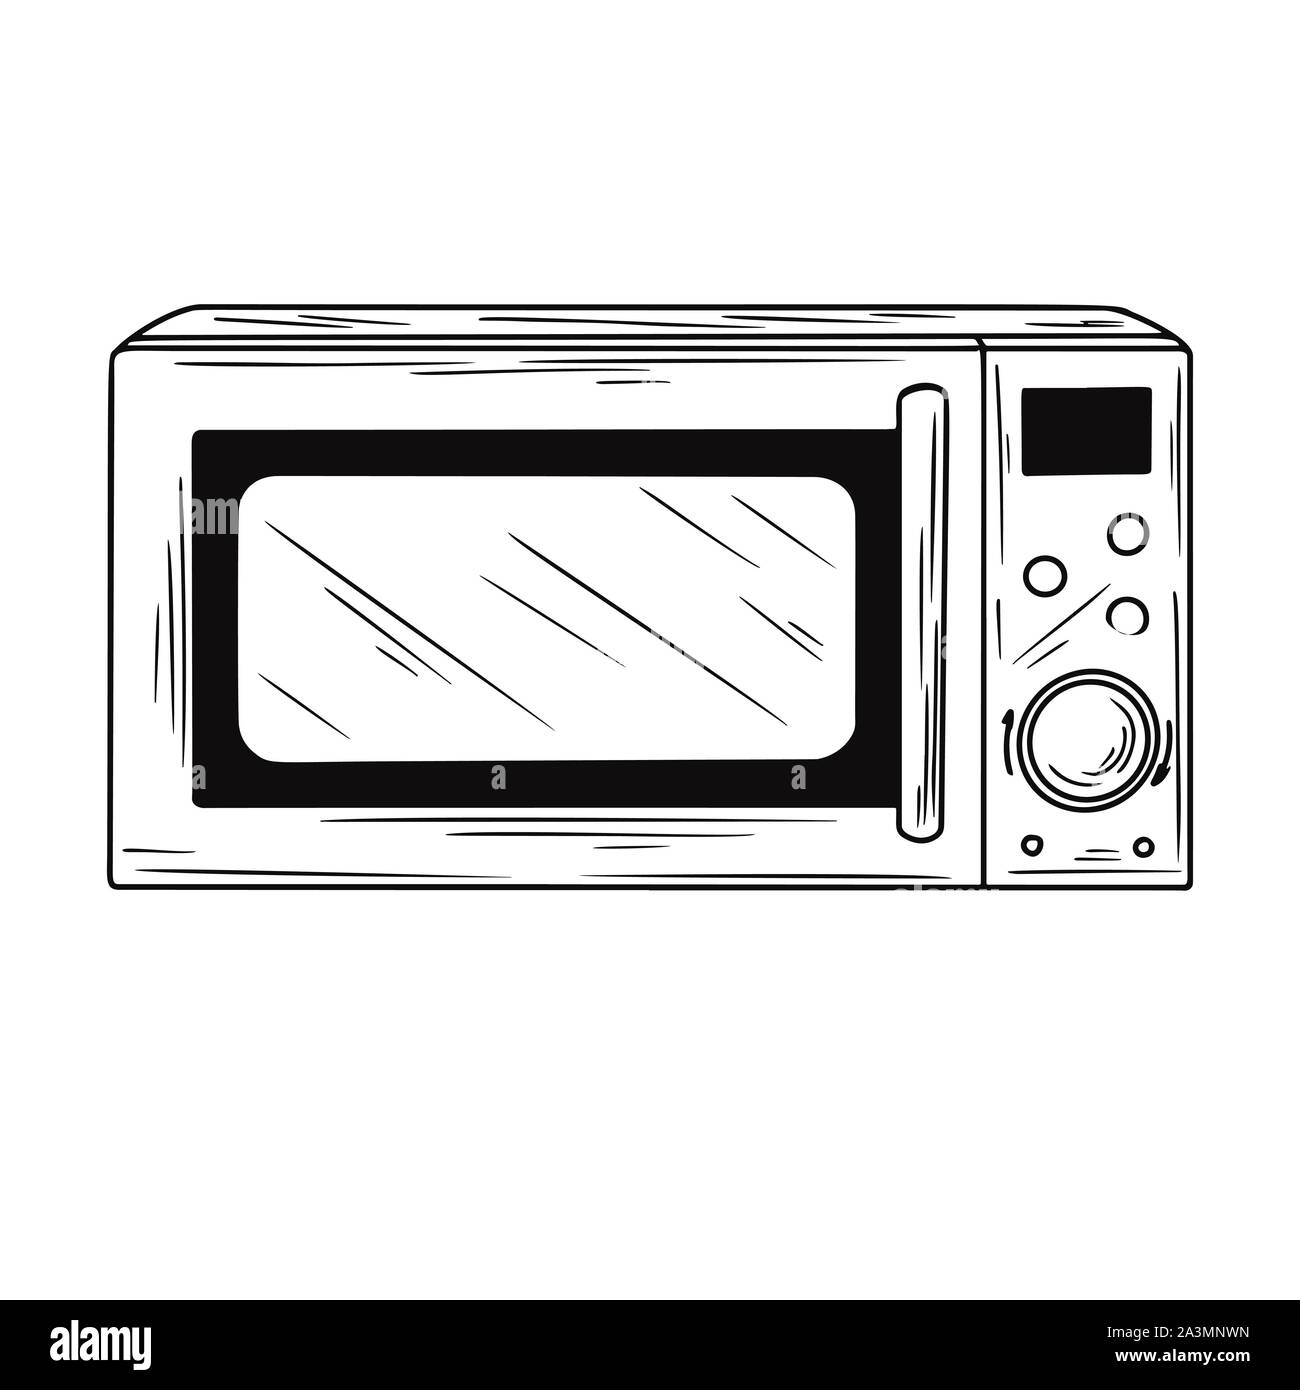 6034 Stove Oven Drawing Images Stock Photos  Vectors  Shutterstock